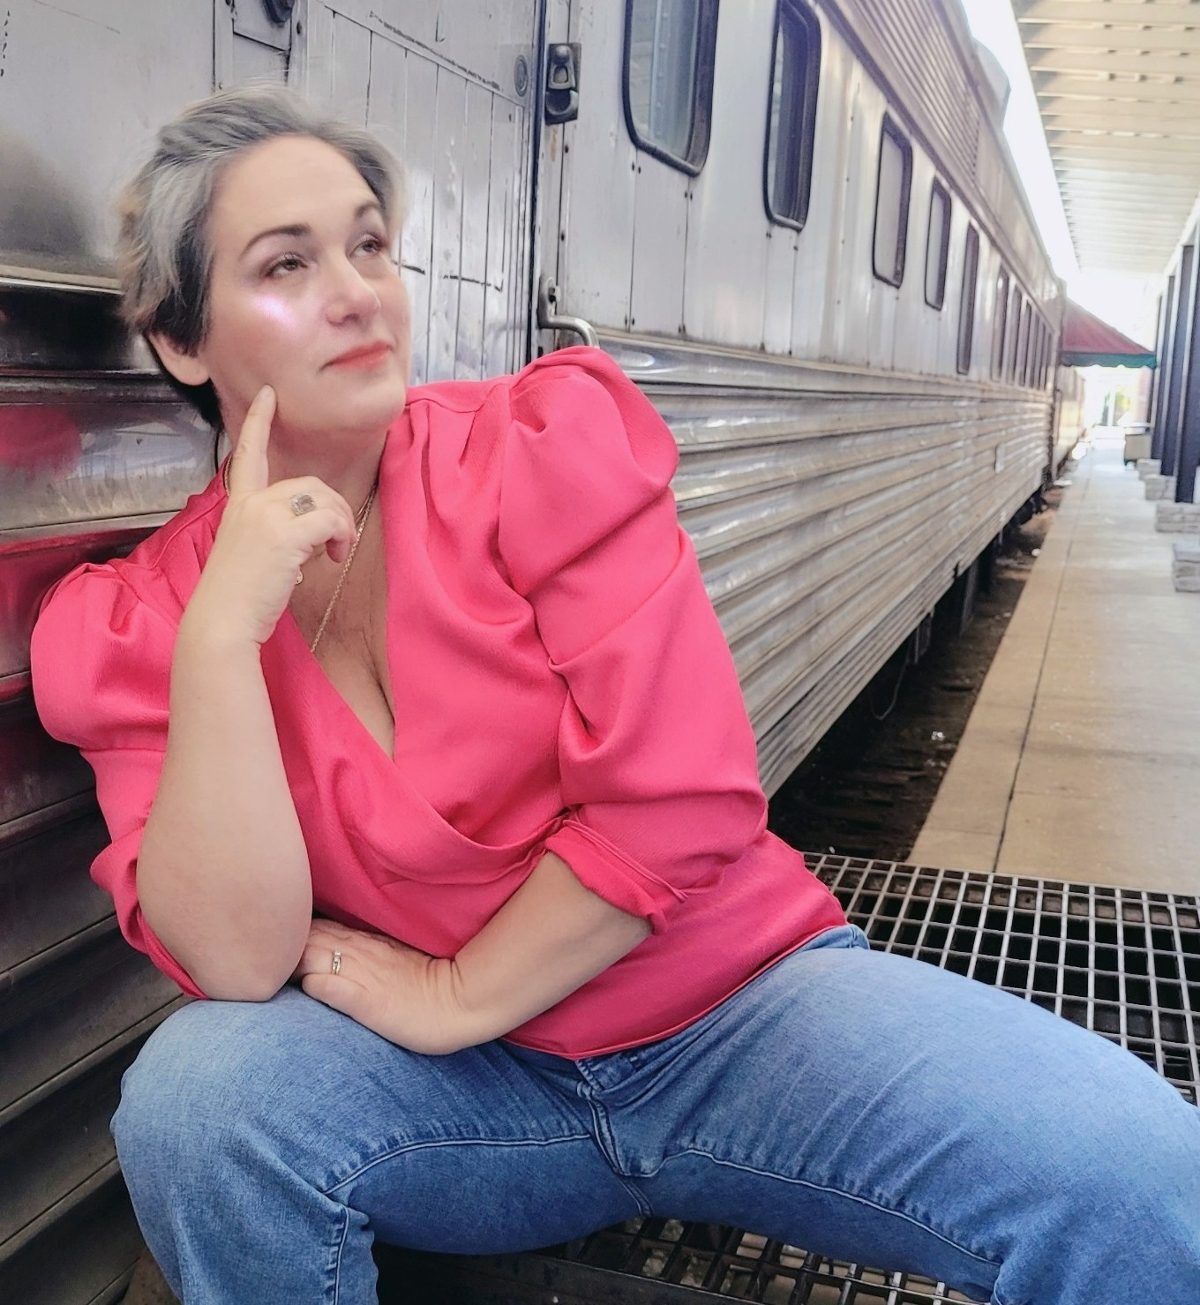 Going Grey on Purpose "Kathy Brown, a top Travel Blogger in Chattanooga, is wearing a pink blouse and casually looking off into the distance. Her short, gray hair reflects her age-positive influence. She is kneeling against the Chattanooga Choo Choo."